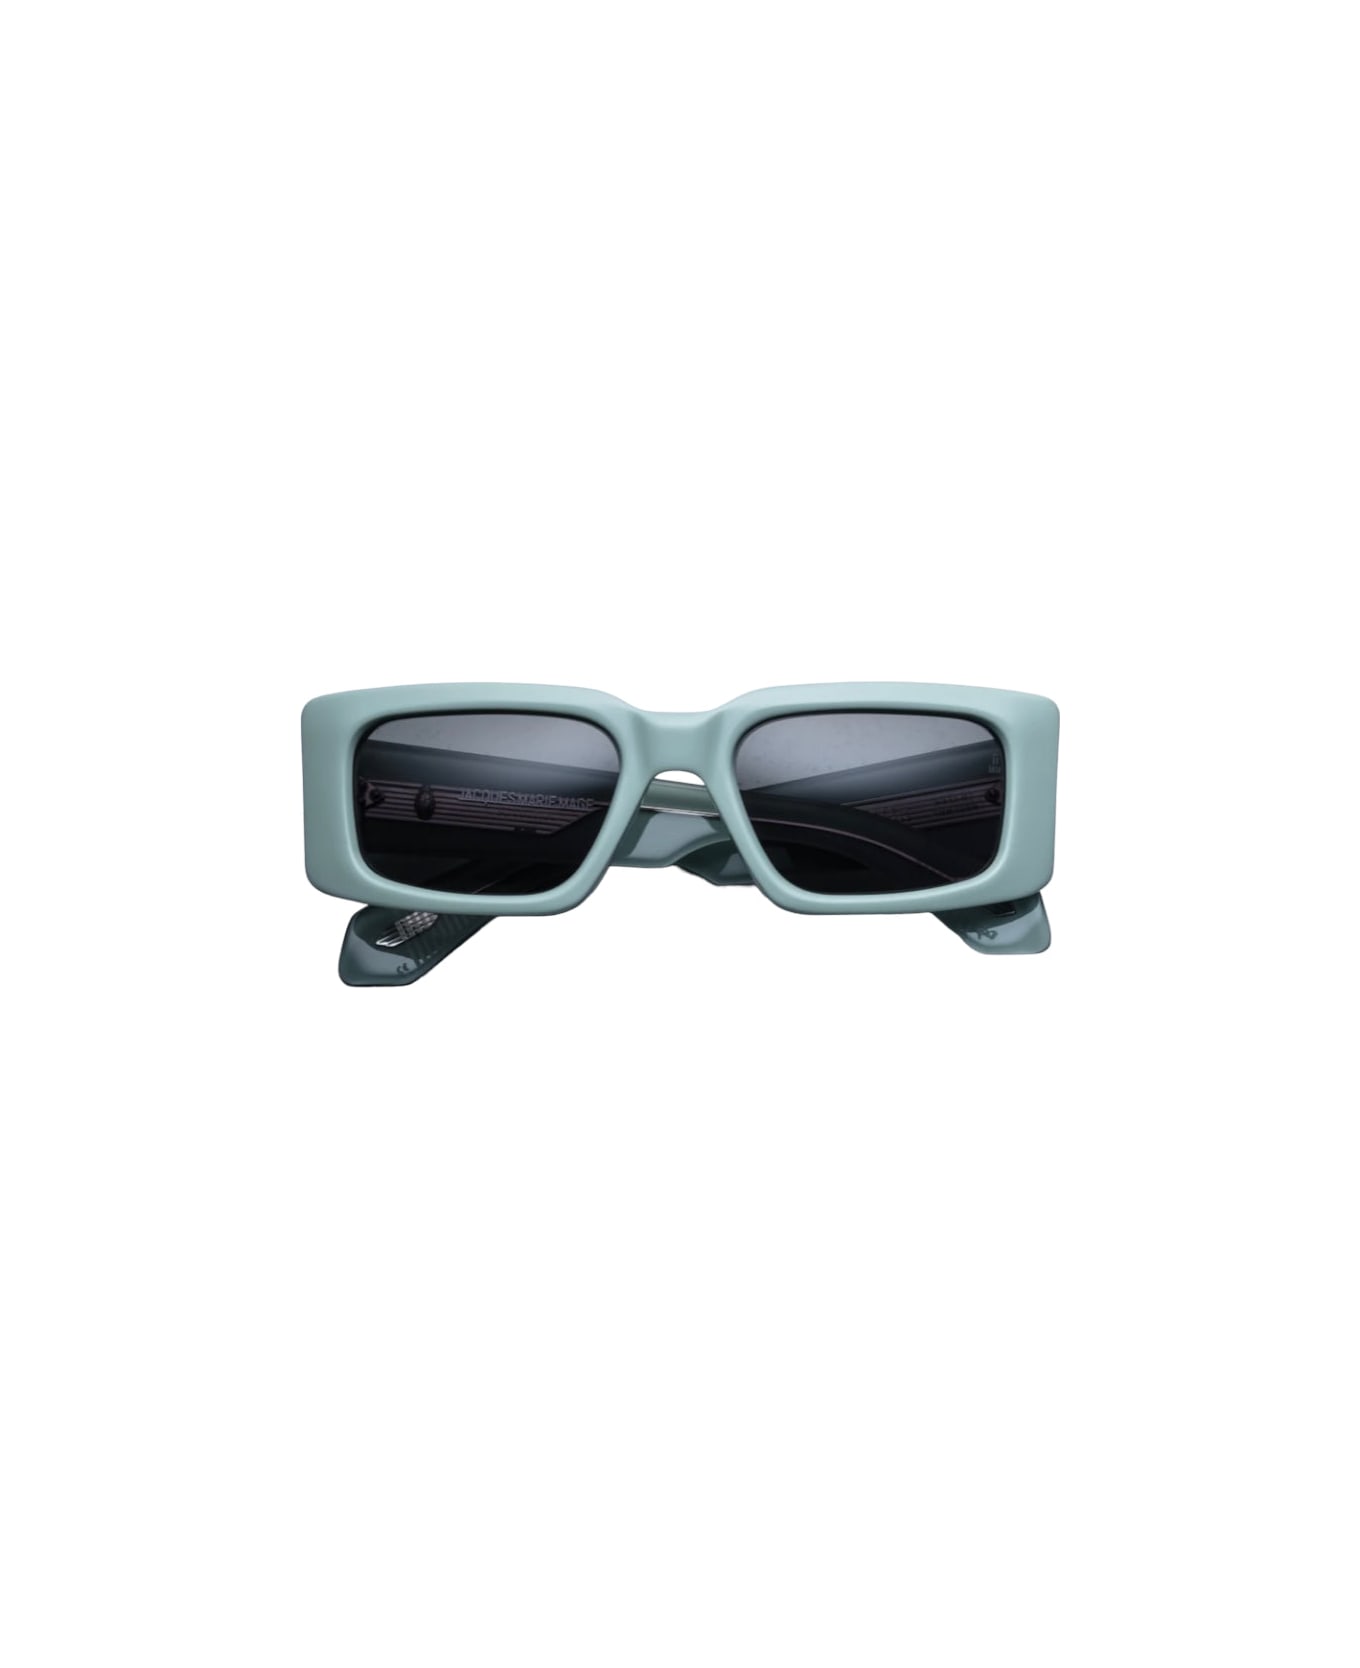 Jacques Marie Mage Supersonic - Glassier Sunglasses サングラス